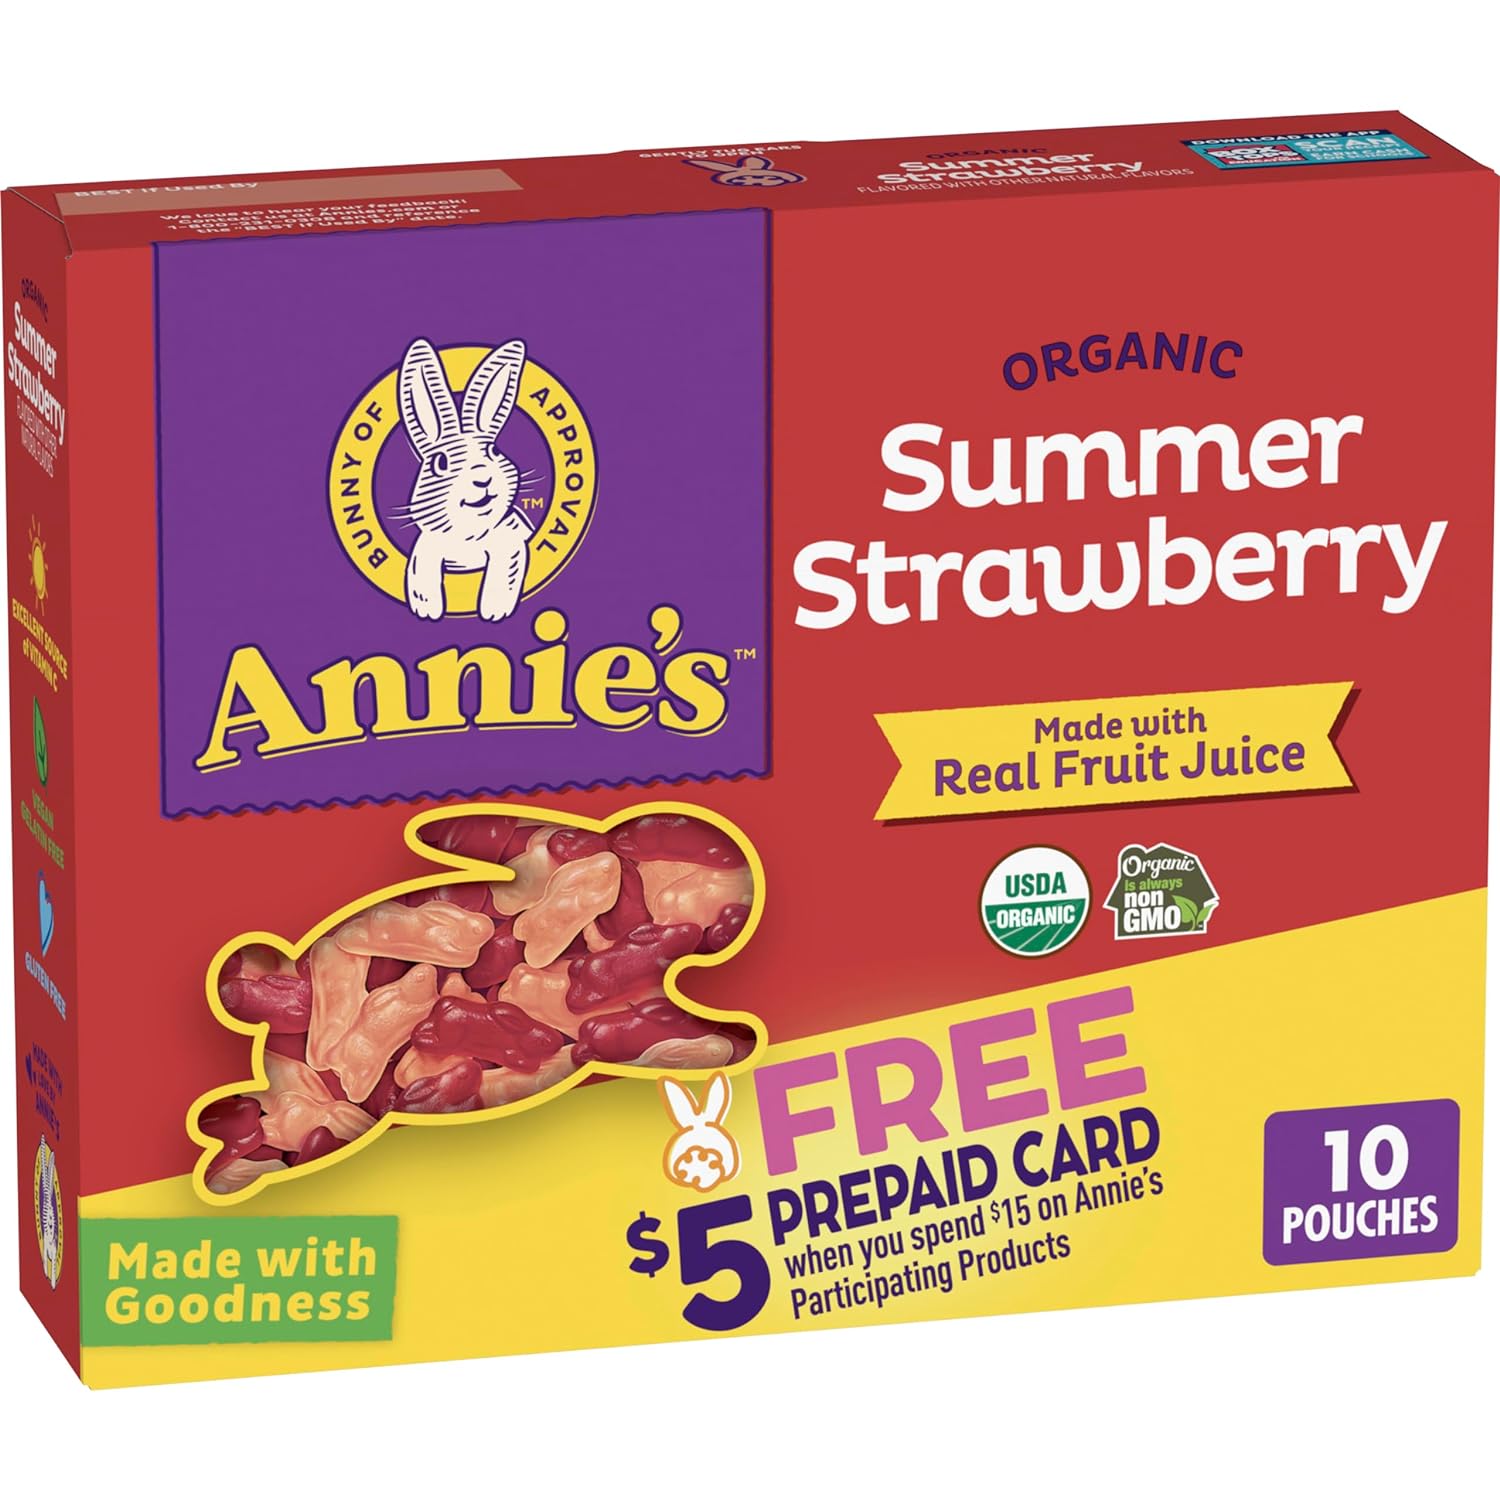 Annies Organic Bunny Fruit Flavored Snacks, Summer Strawberry, Gluten Free, 10 Pouches, 7 Oz.